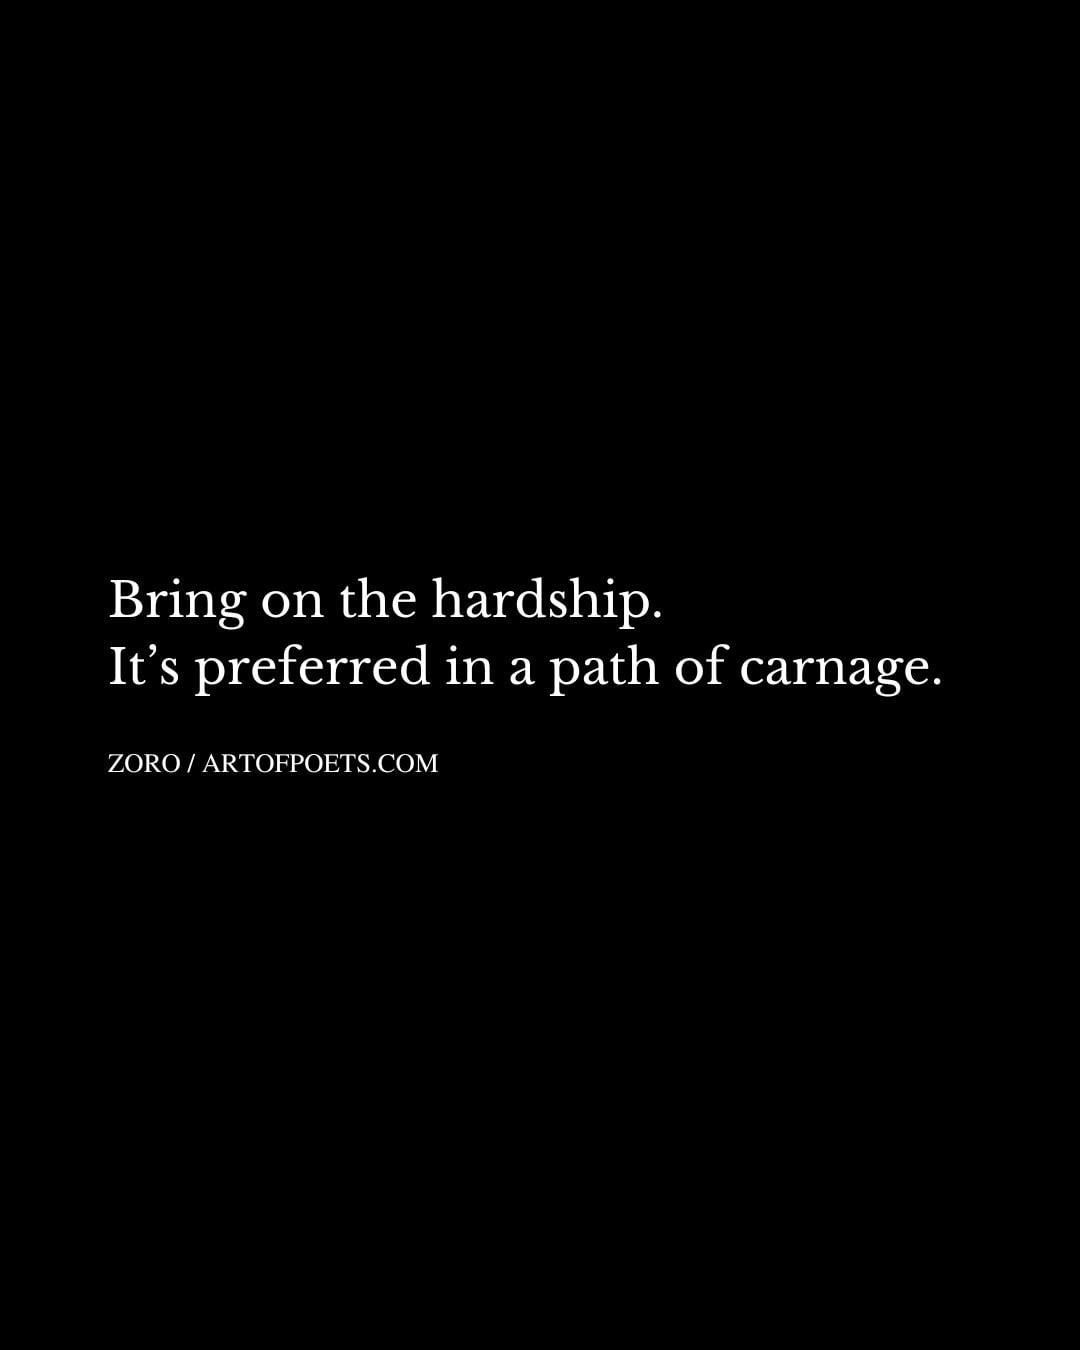 Bring on the hardship. Its preferred in a path of carnage